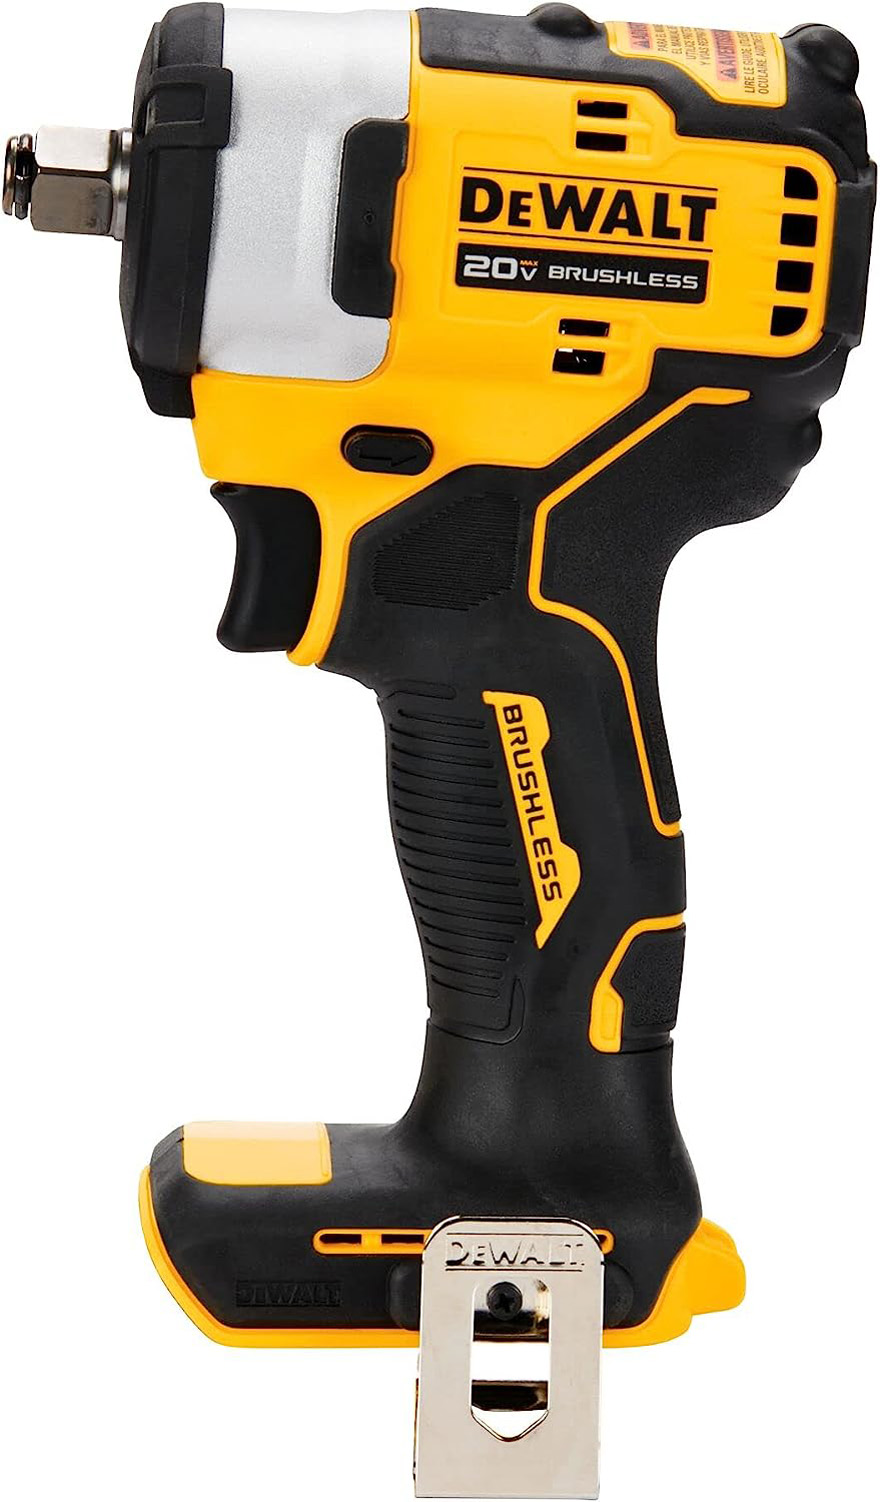 DEWALT DCF911B 20-volt Max Variable Speed Brushless 1/2-in square Drive Cordless Impact Wrench